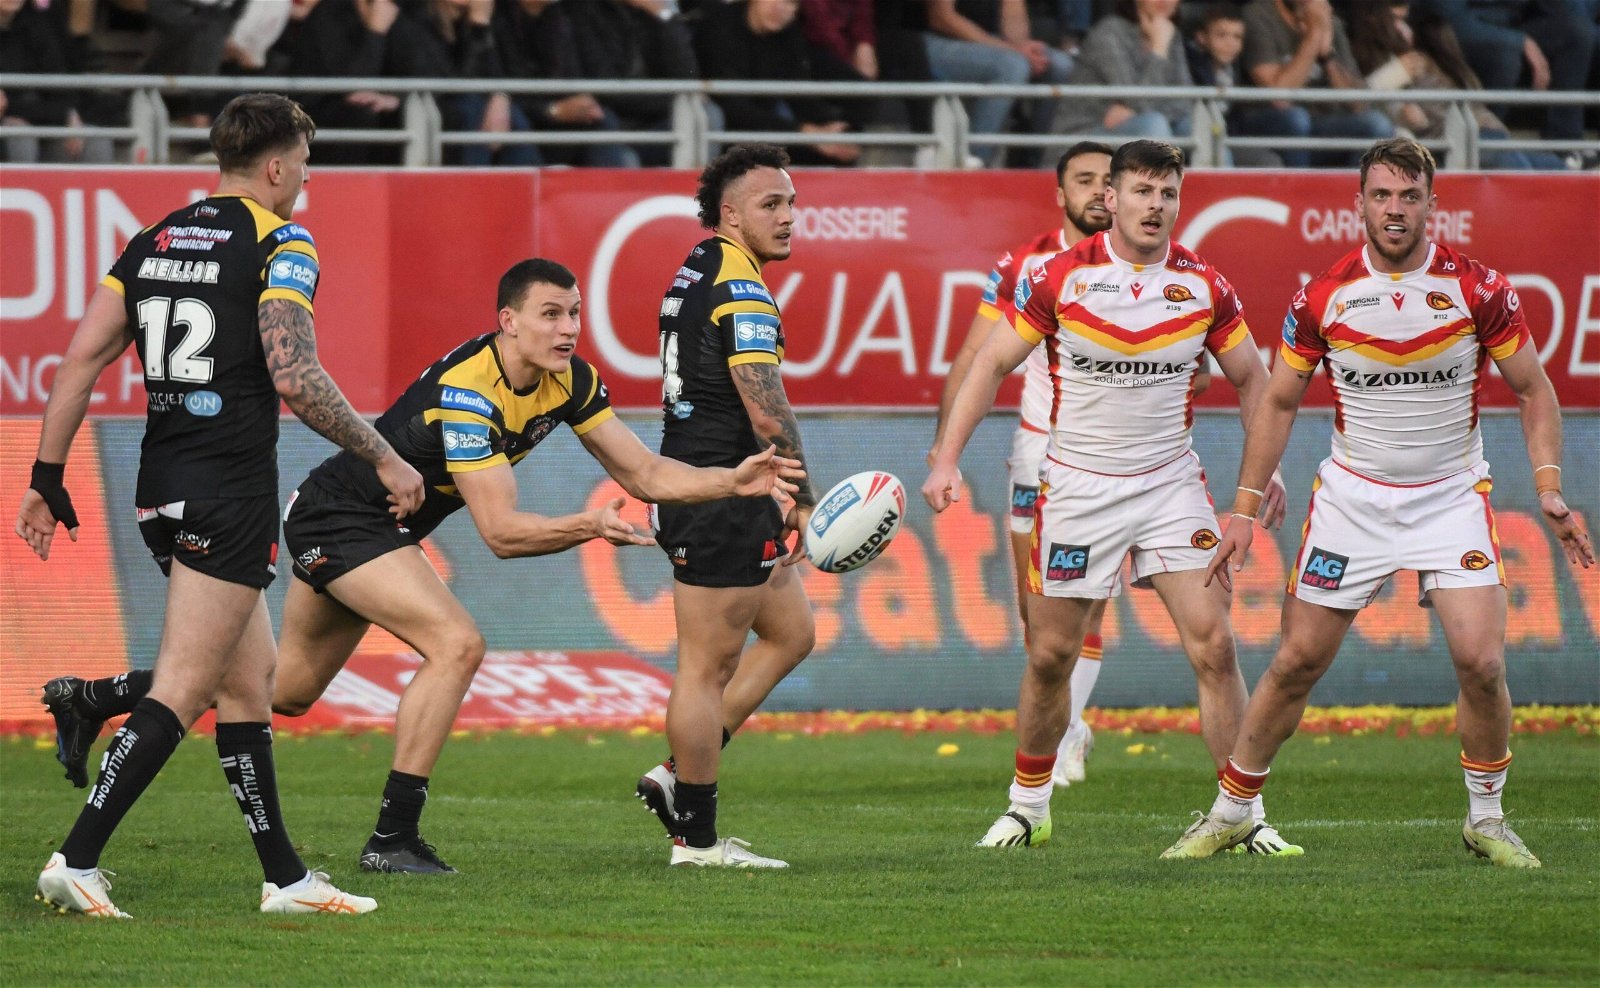 Innes Senior passes the ball for Castleford Tigers, in their black and amber kit, in Super League action against Catalans Dragons, who wear white with red and yellow detailing.